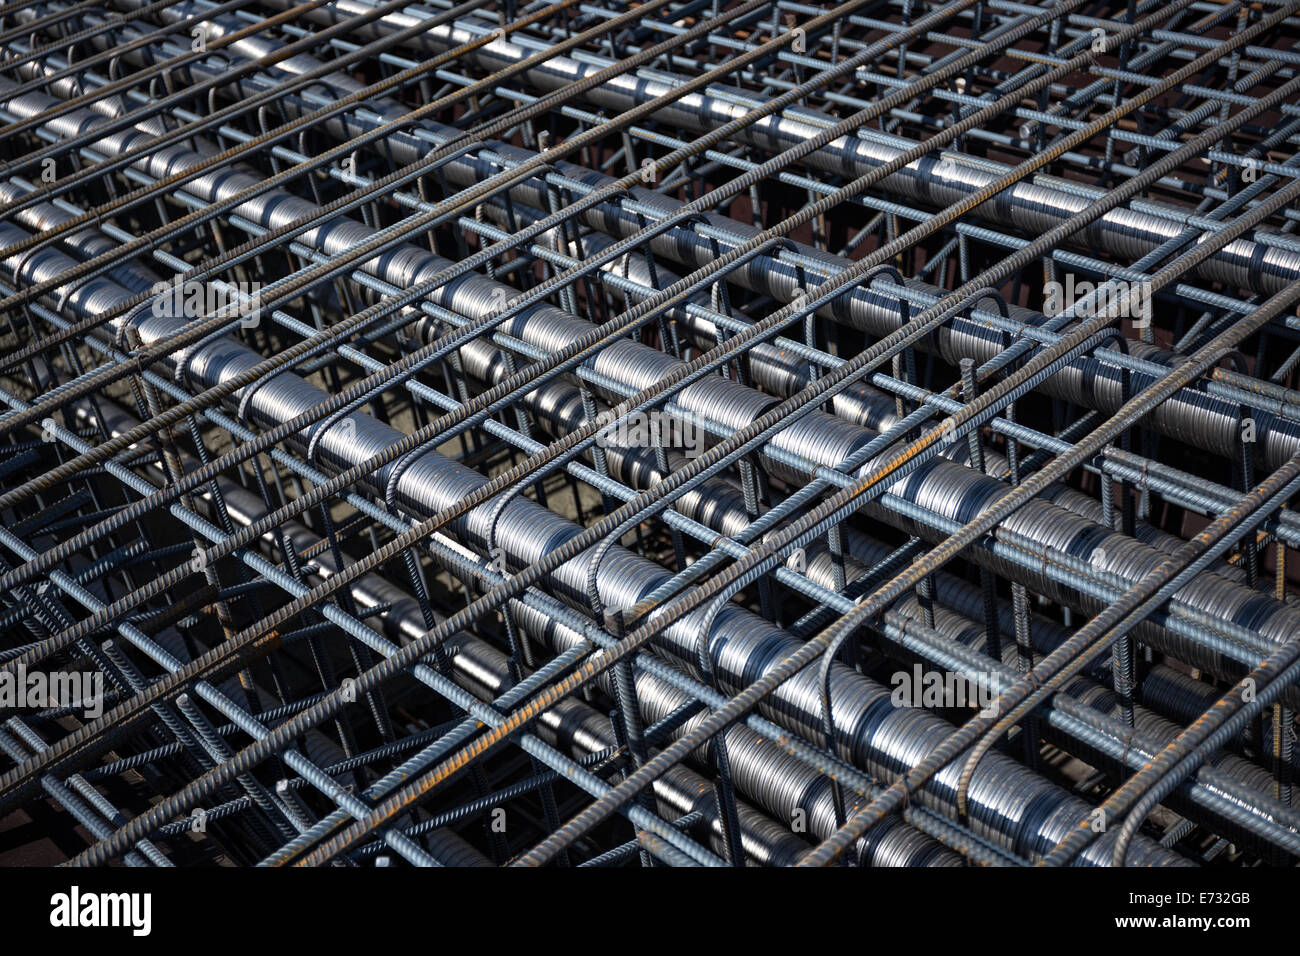 Ferro-concrete reinforcement with tensioned cables in the superstructure of the bridge. Stock Photo